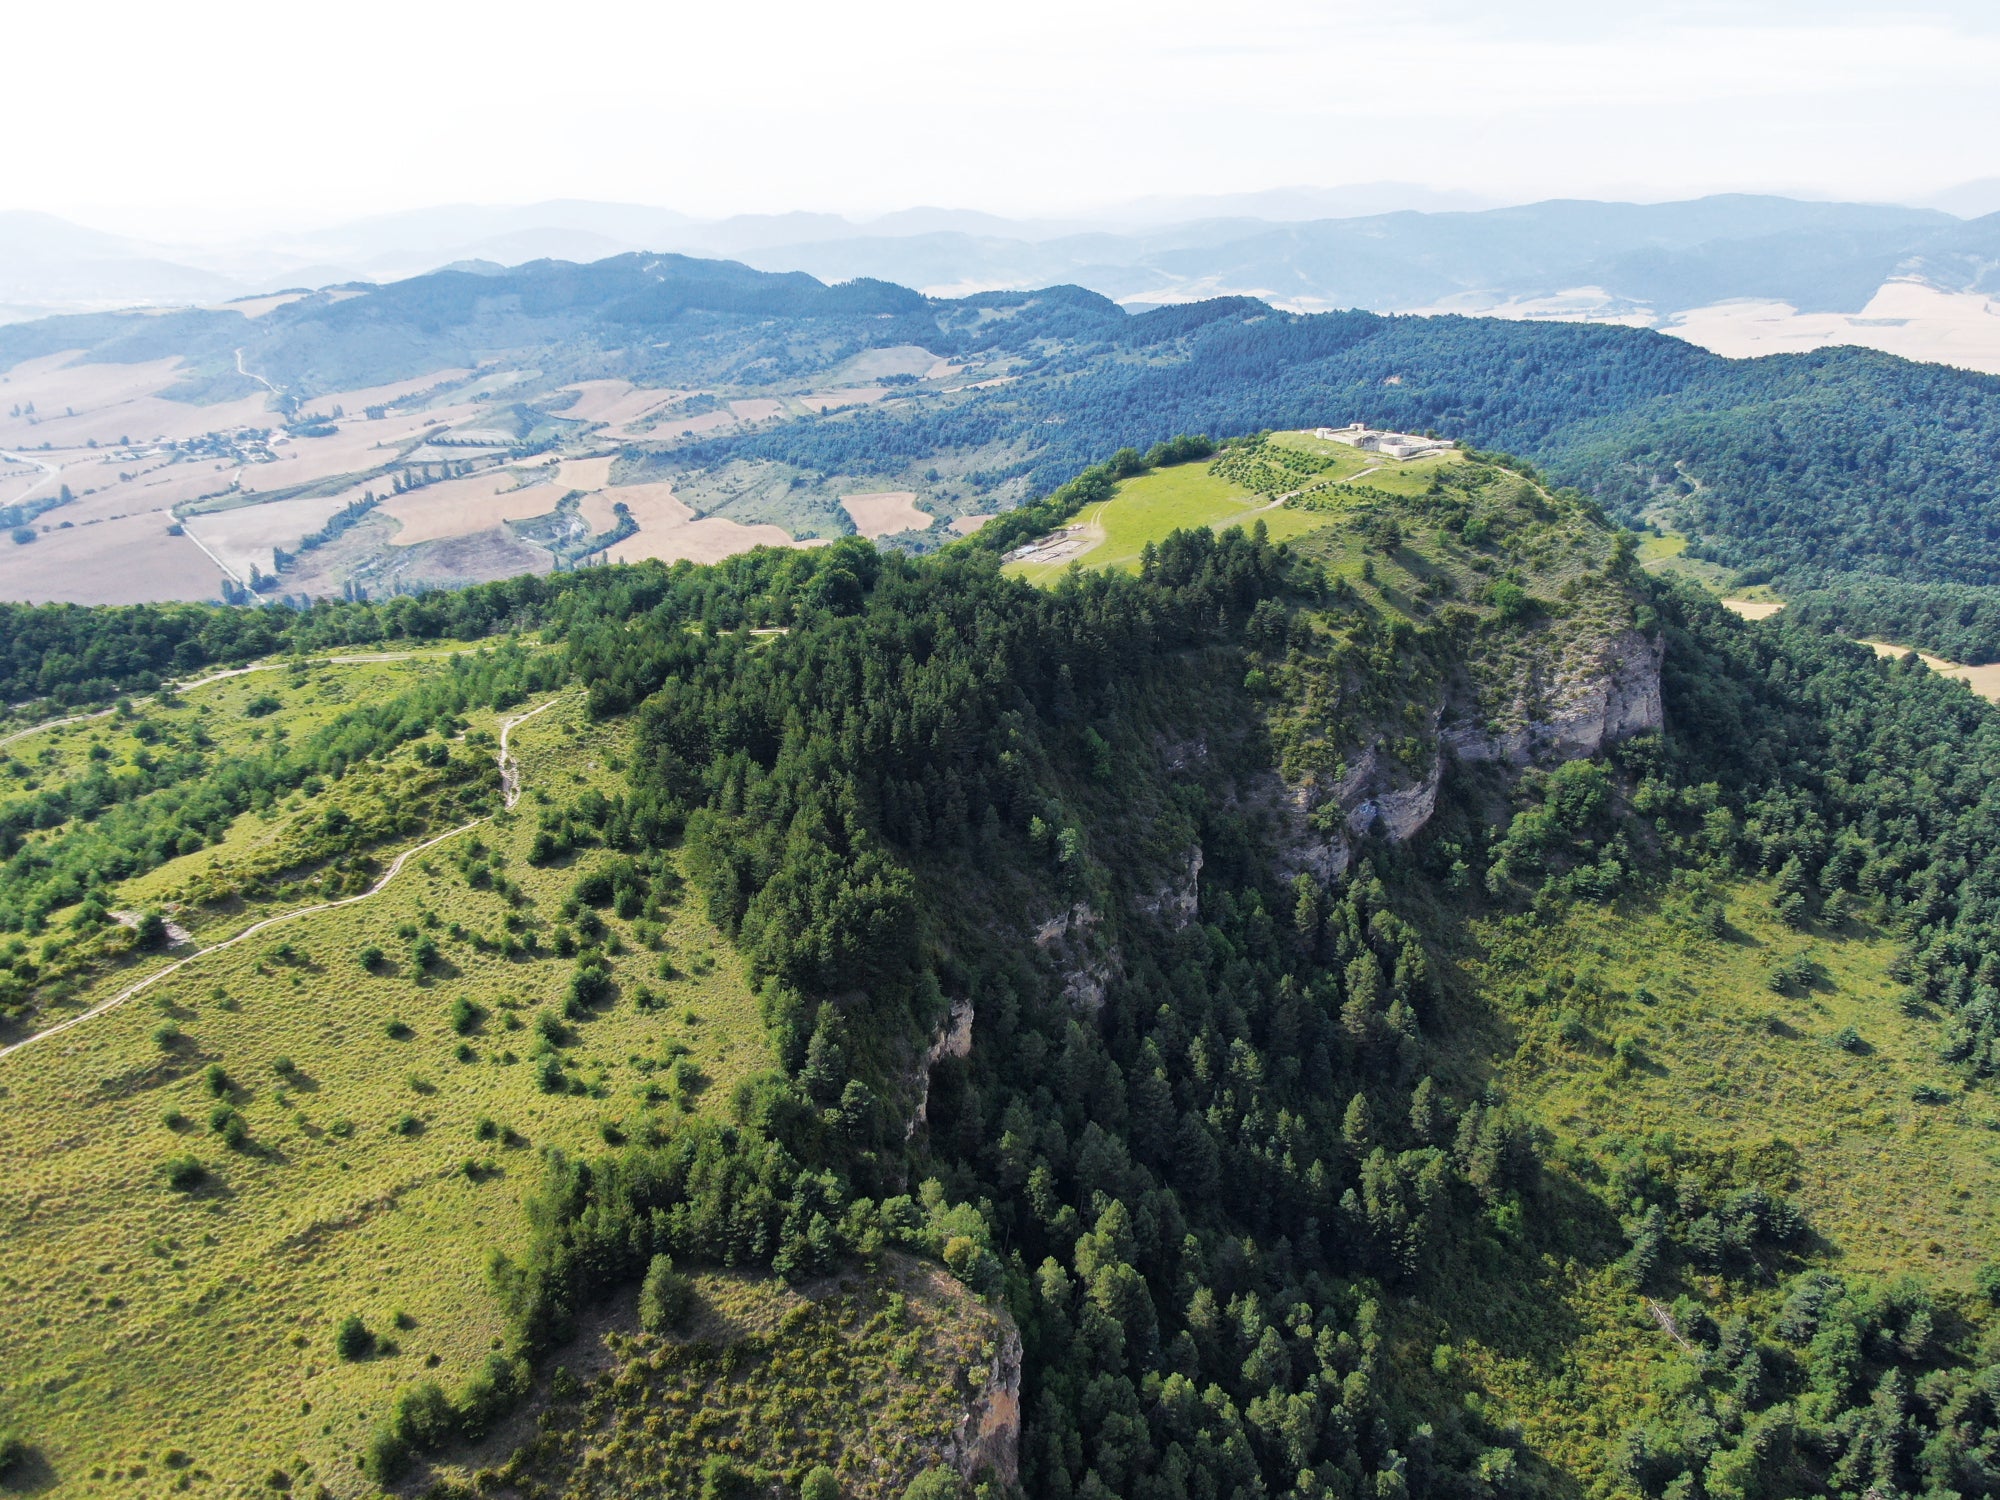 Dramatic photograph showing the mountaintop location of the ancient Basque fortified settlement - and the cliffs which surround it on three sides.